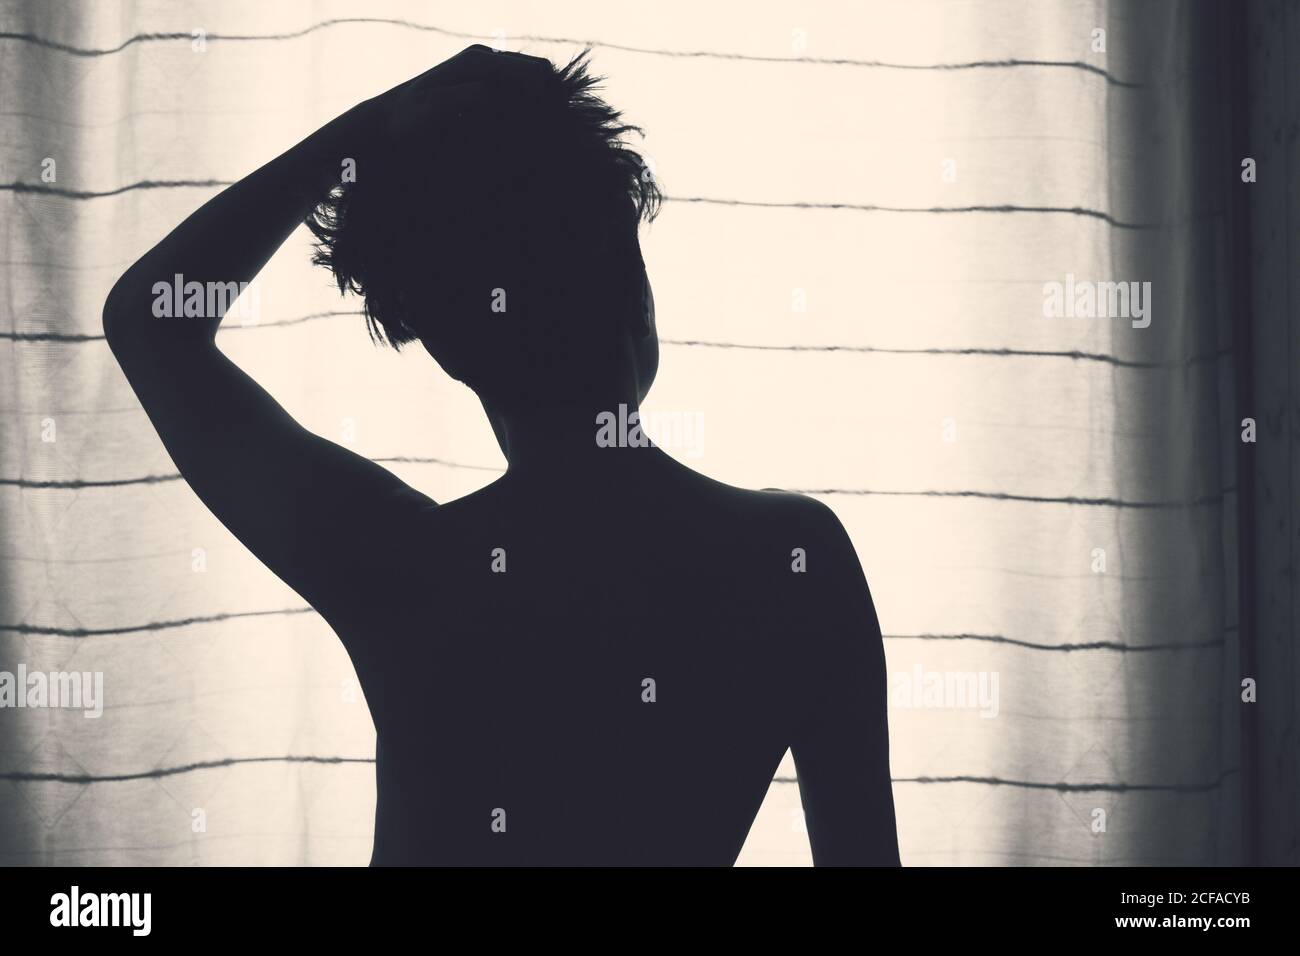 Back view of unrecognizable silhouette of female with short hair rising hand up and standing in front of window with curtain Stock Photo